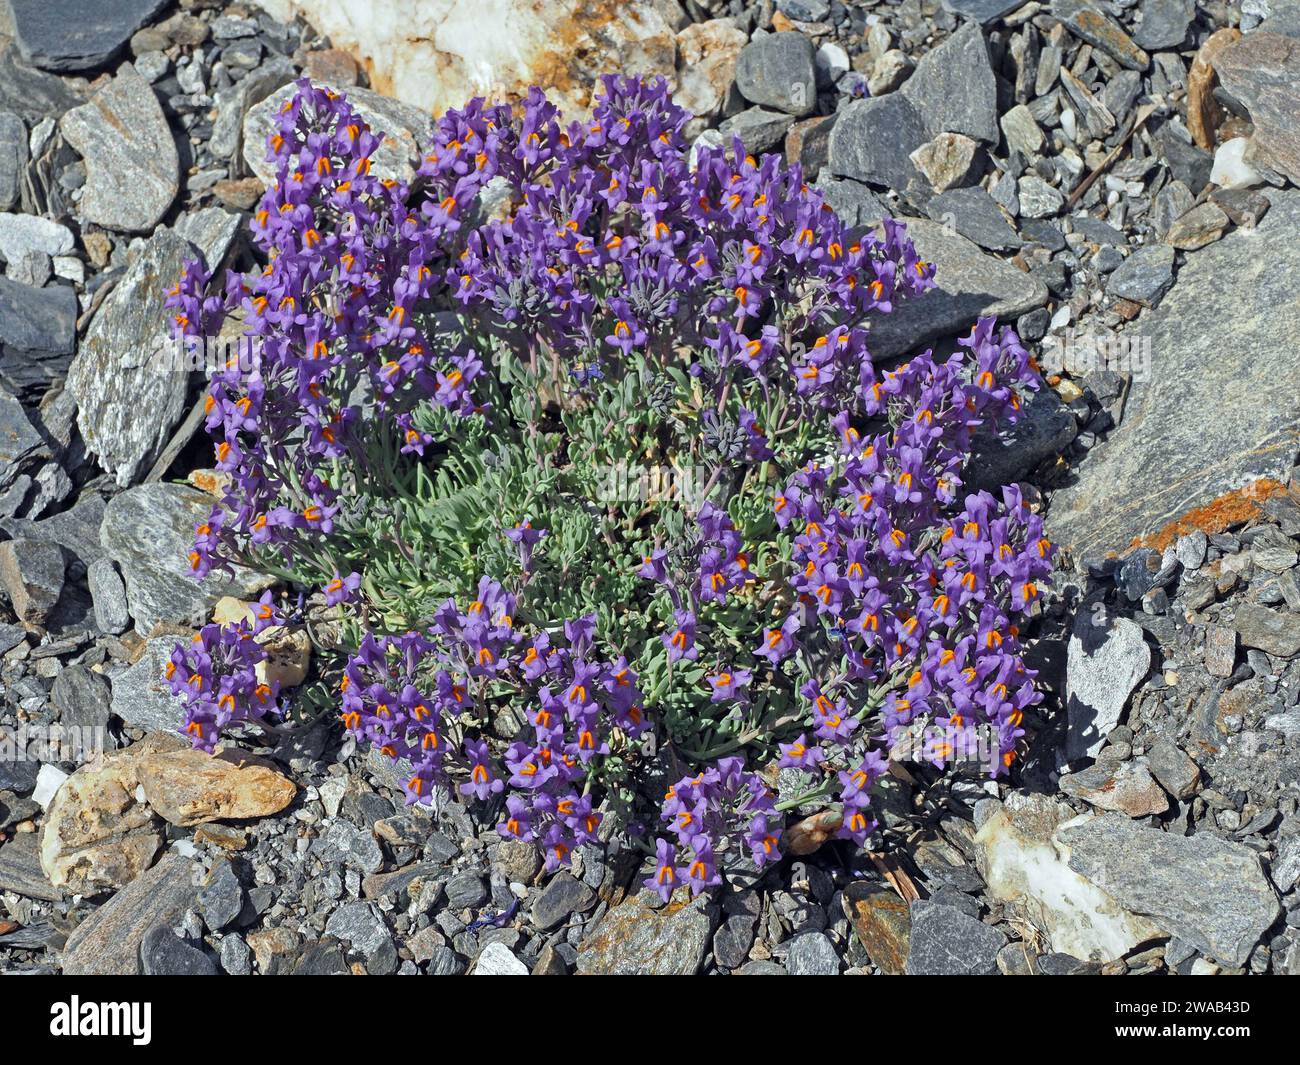 purple and orange flowers of Alpine Toadflax (Linaria alpina) growing on rock scree in the foothills of the Italian Alps, Europe Stock Photo